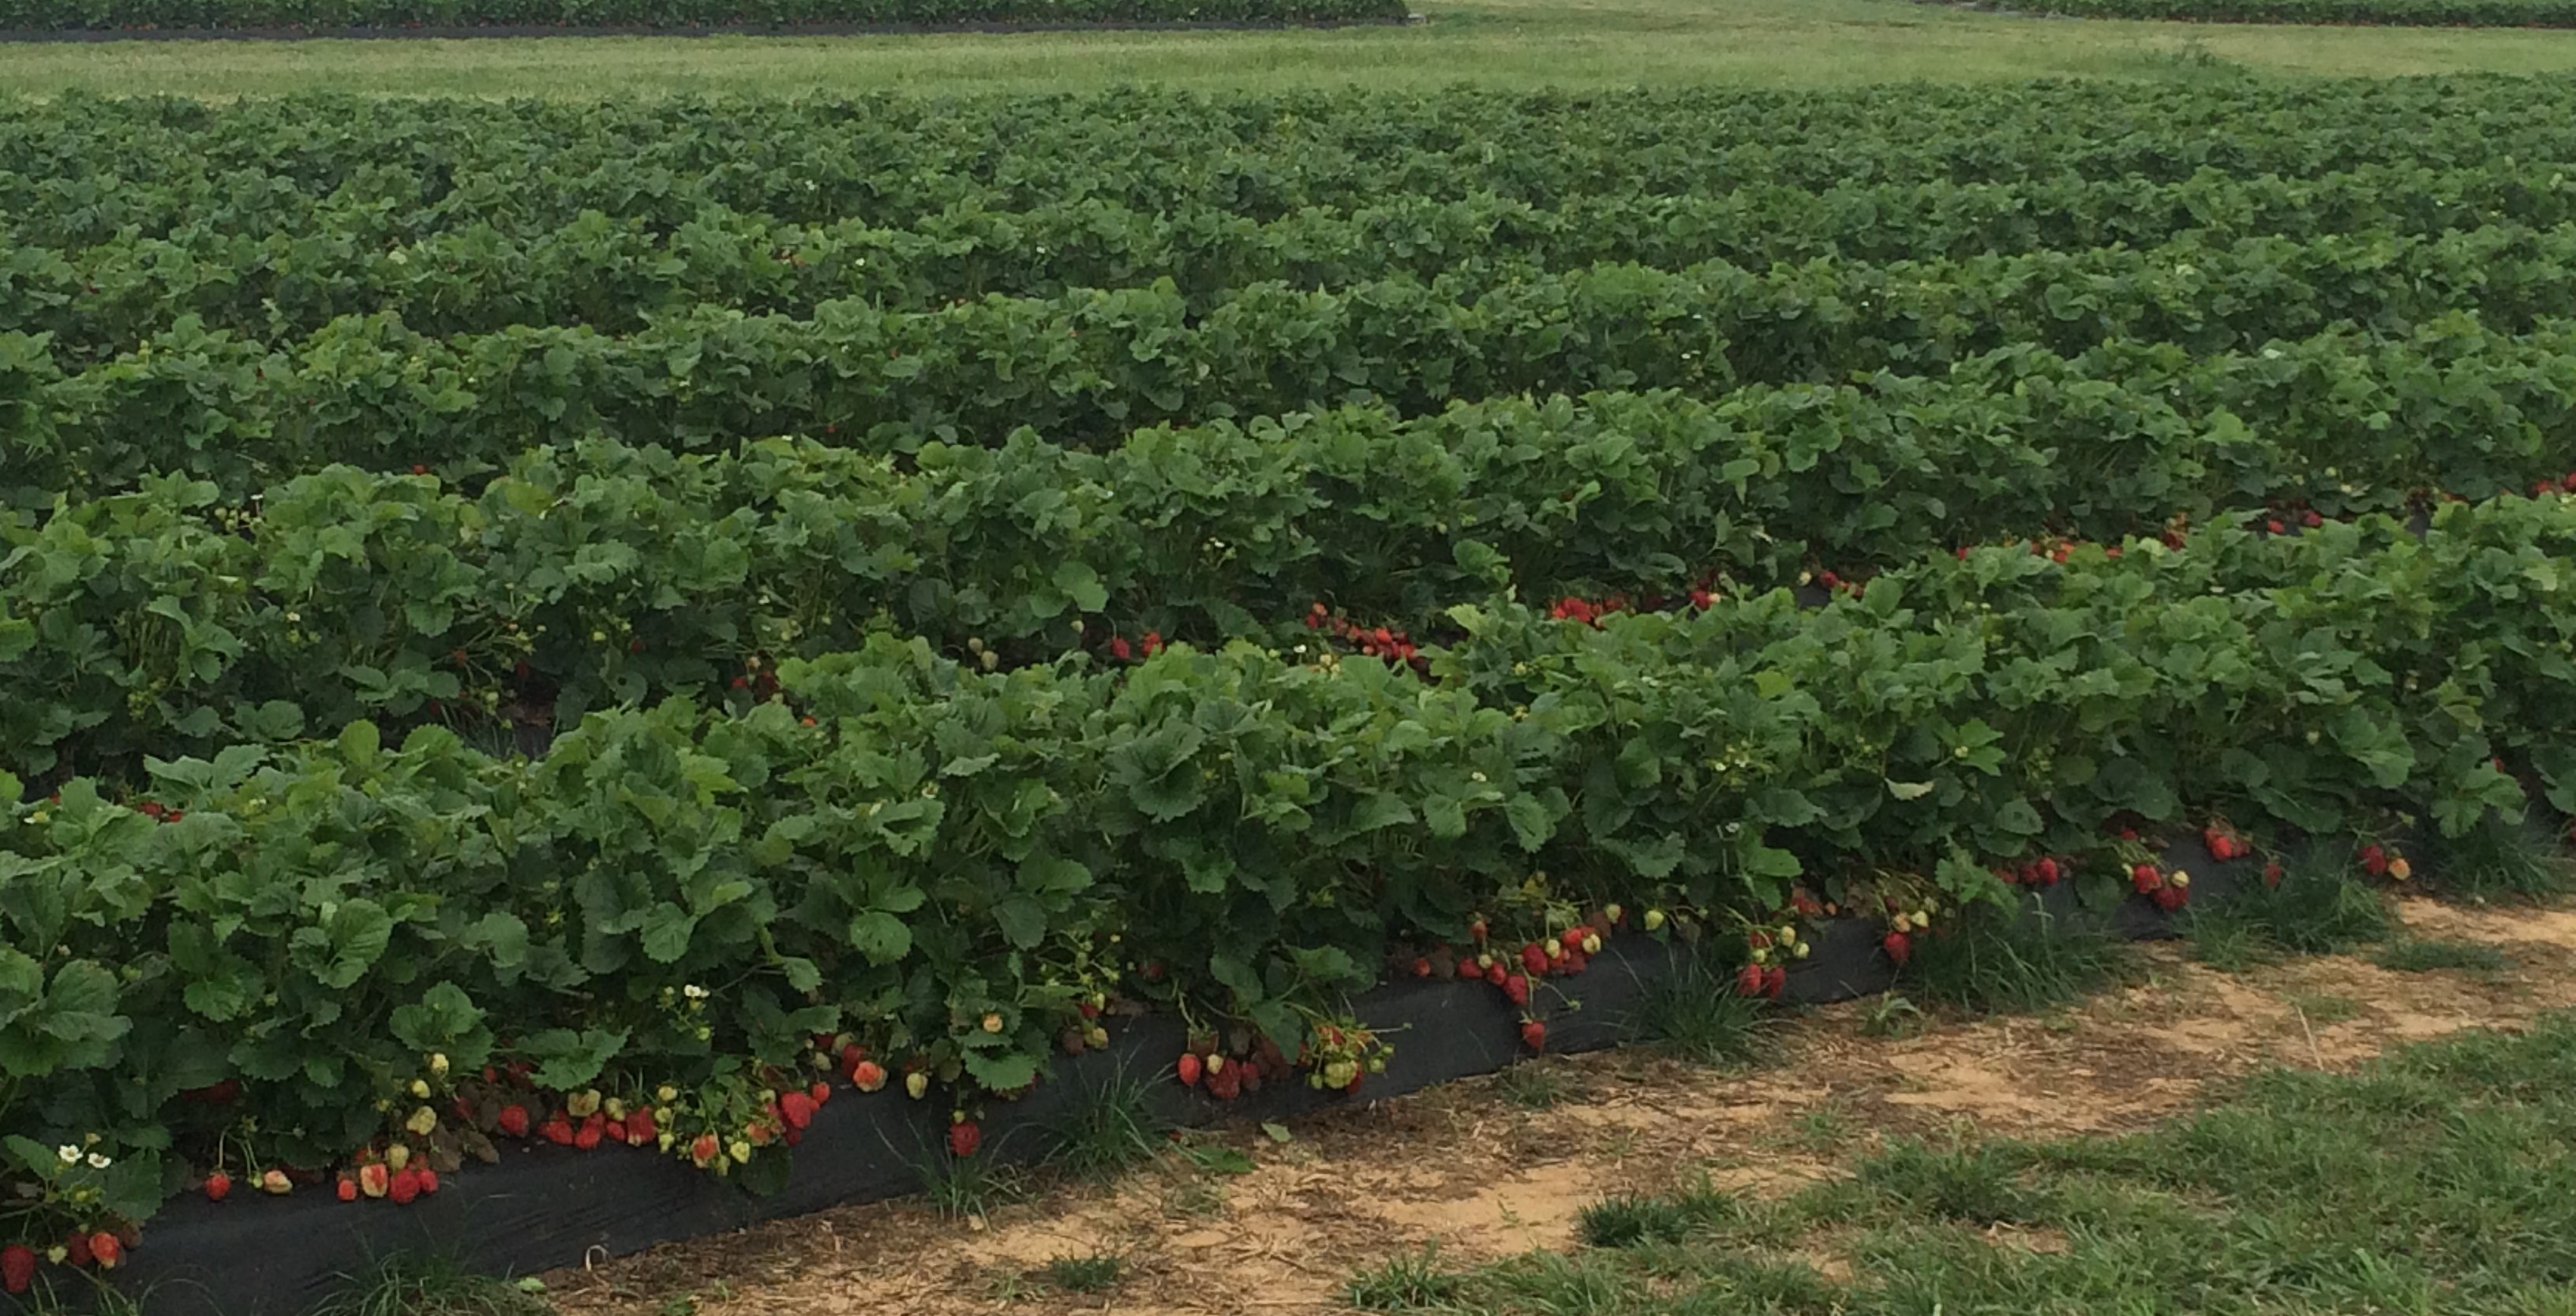 Rows of Strawberries